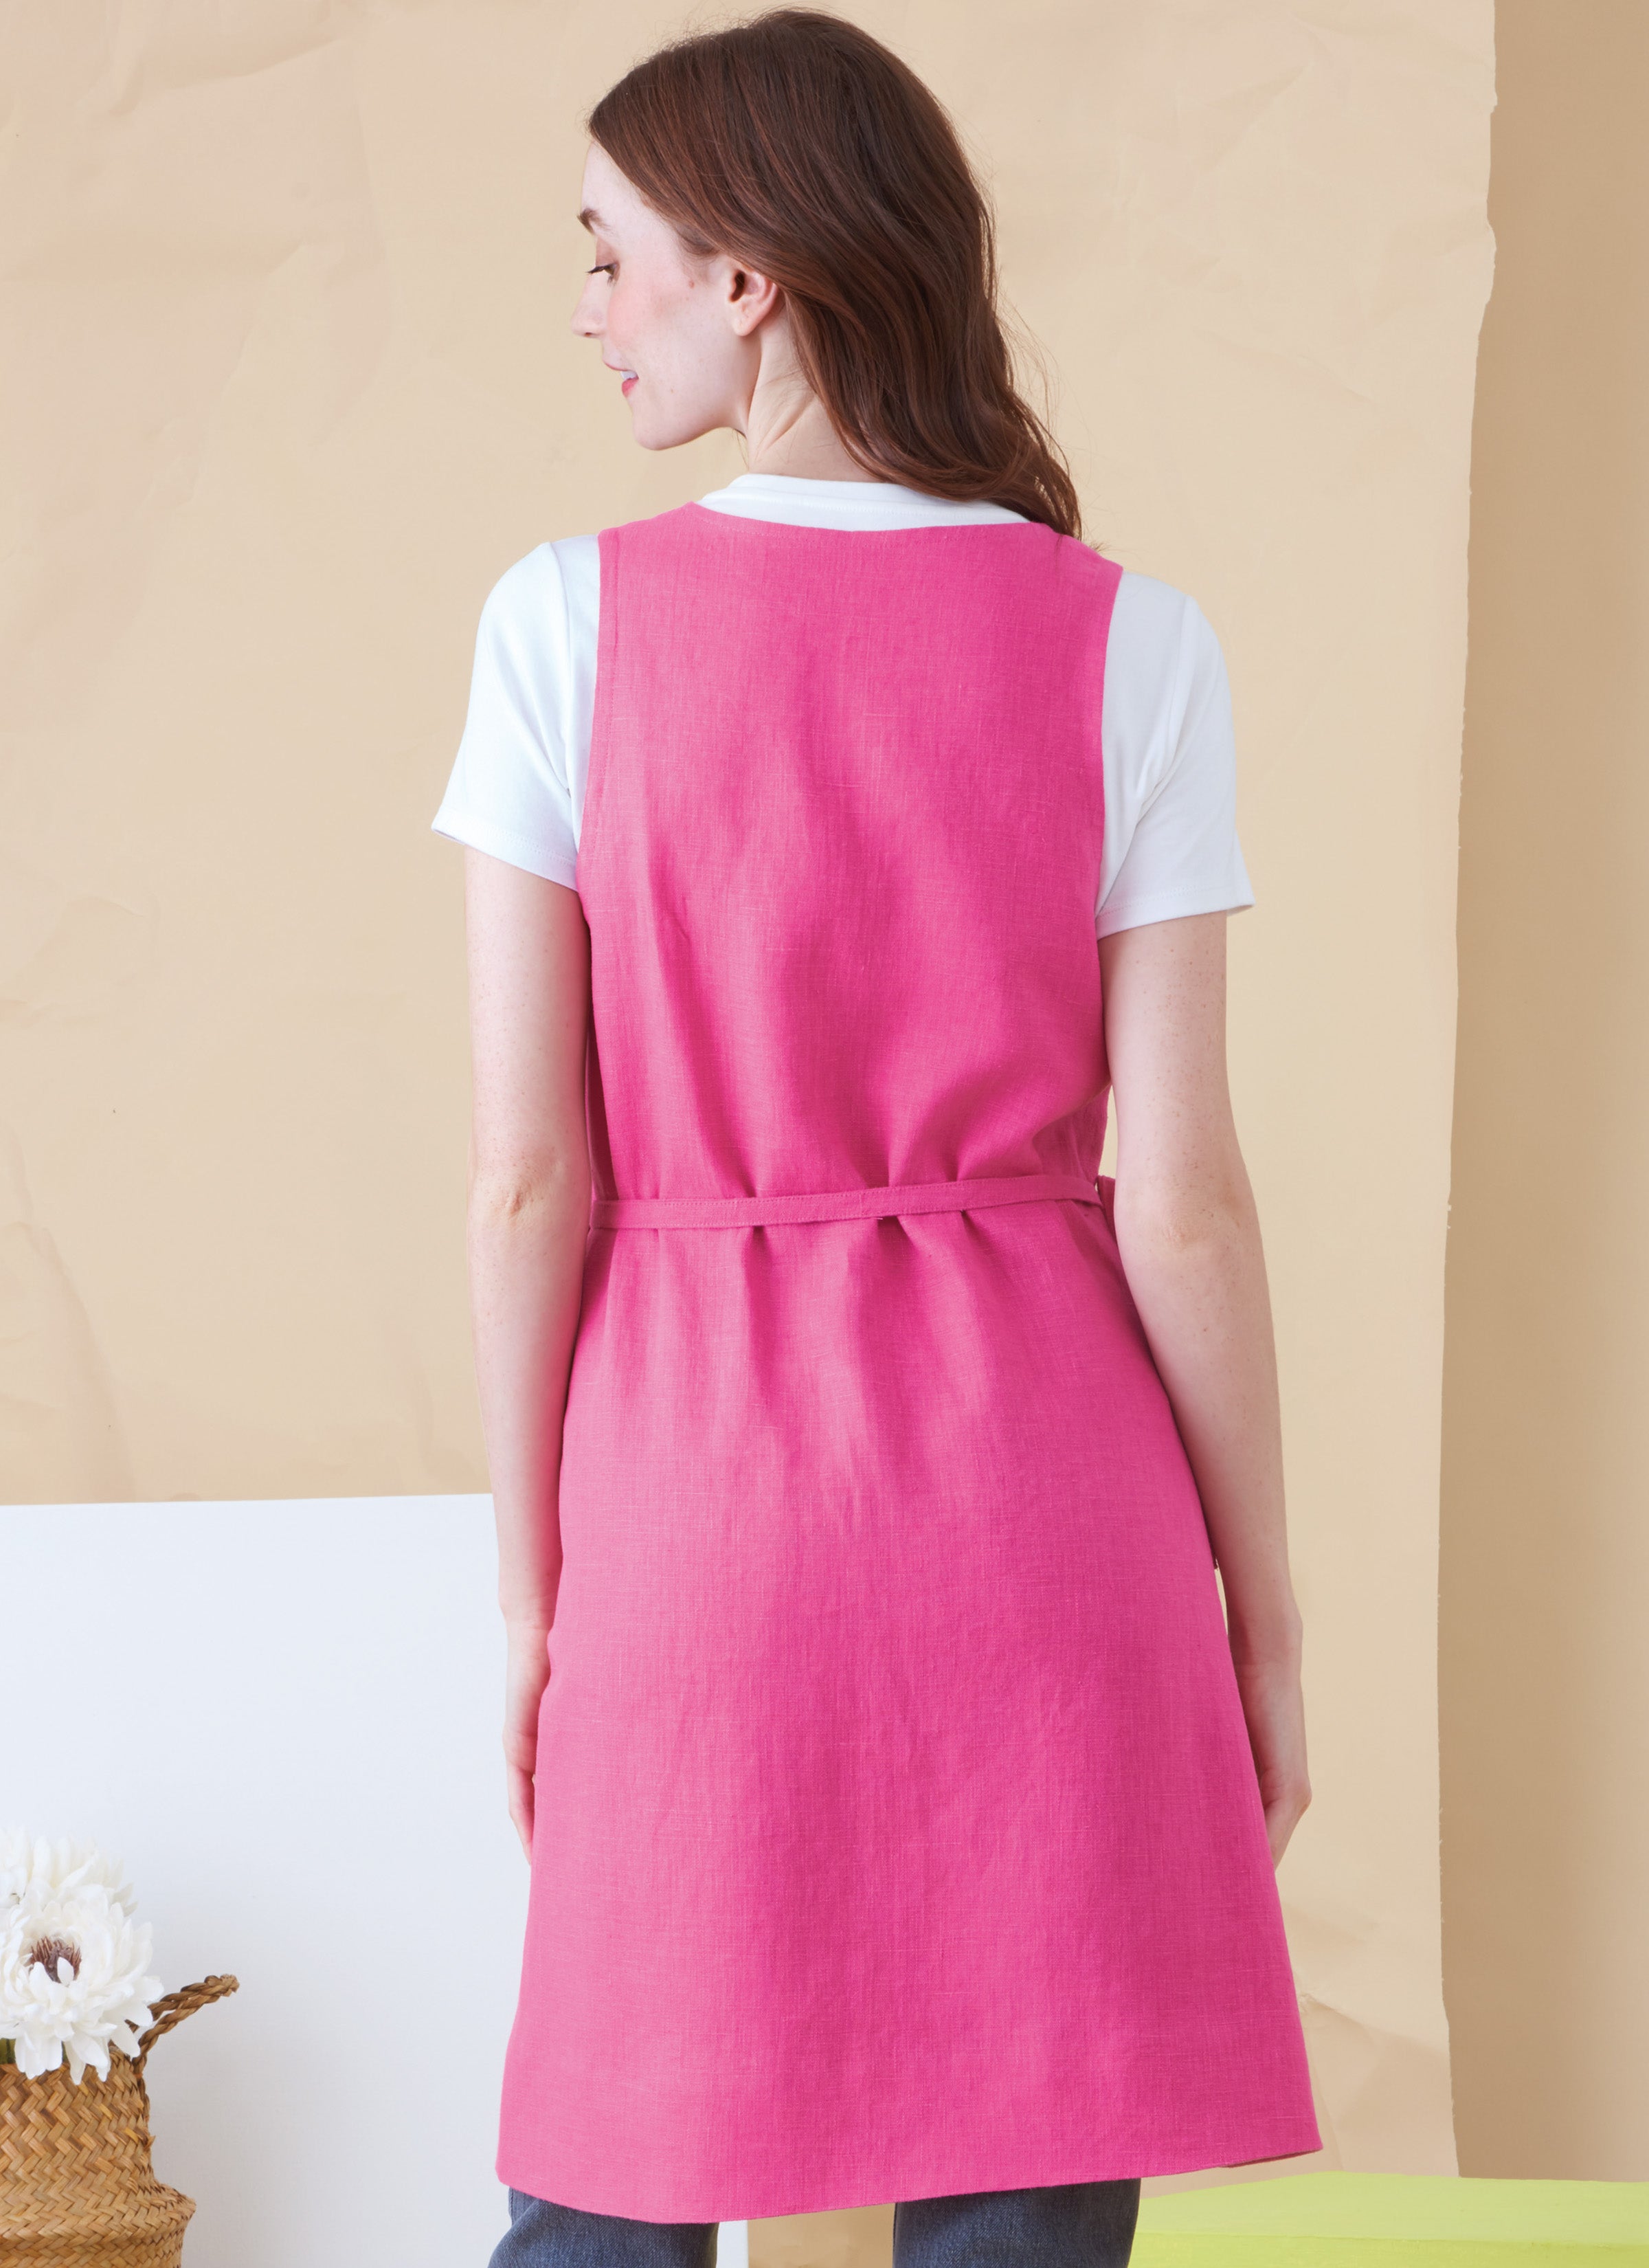 Simplicity 9766 sewing pattern Misses' Tabard Aprons by Elaine Heigl Designs from Jaycotts Sewing Supplies